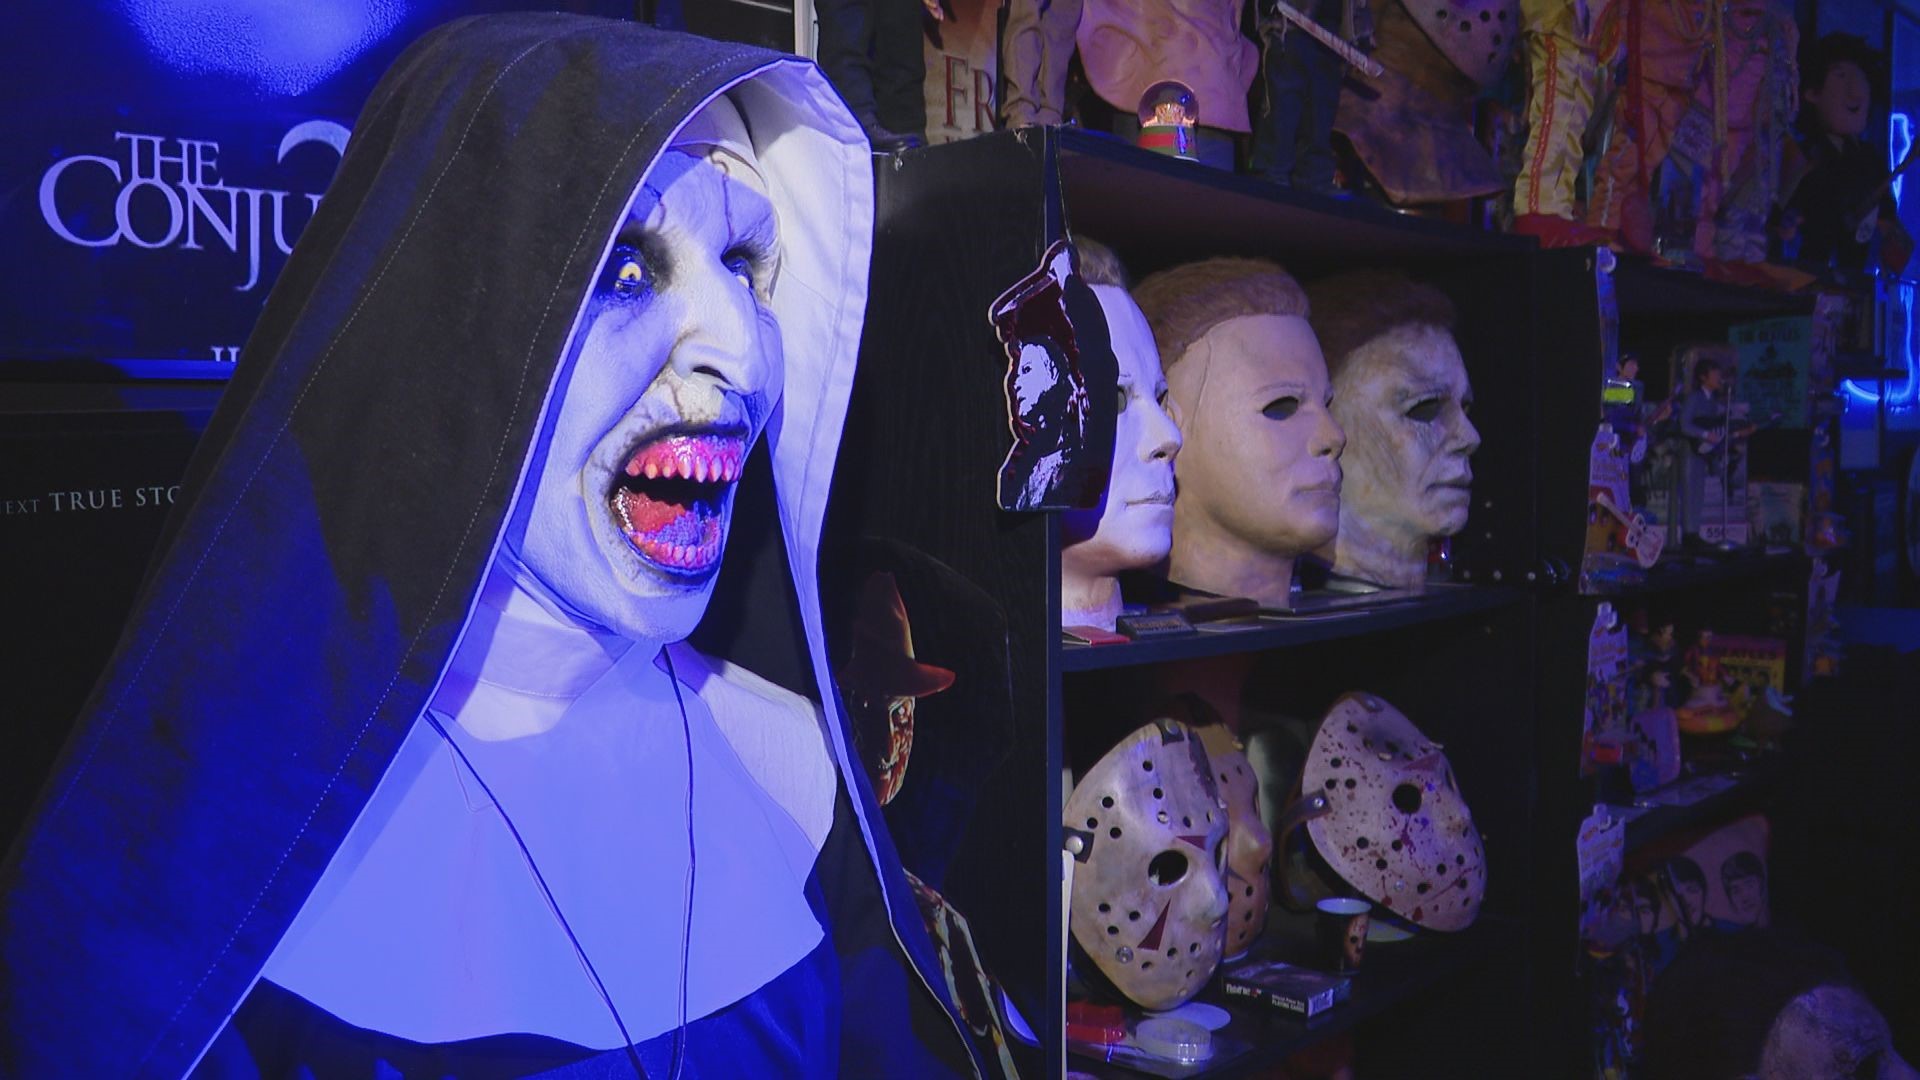 Twin brothers Jon and Shawn Nelson have compiled quite the collection of scary memorabilia in Chesterfield.